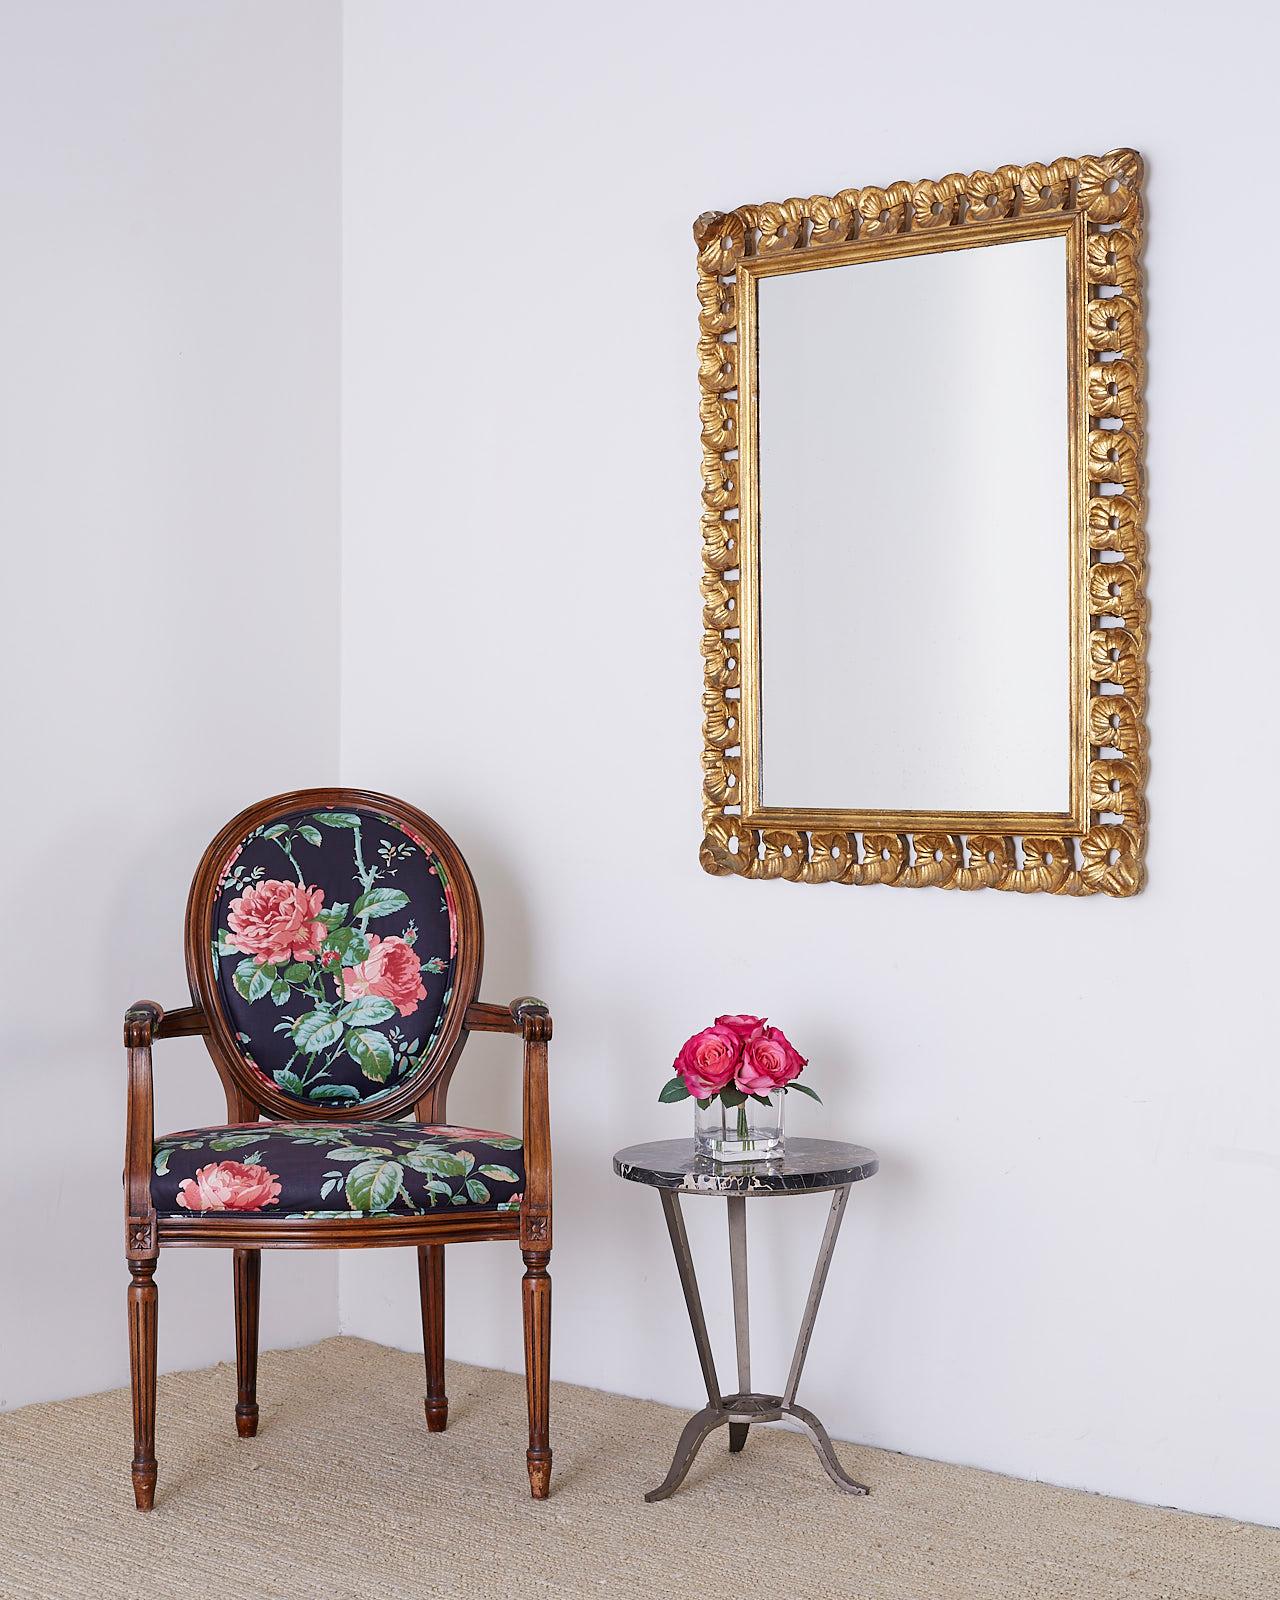 Remarkable Italian Venetian wall mirror featuring a hand carved, ribbon design of fluted and scalloped giltwood. The rectangular mirror can be mounted horizontal or vertical. Interesting design of repeating loops of ribbon with a vintage giltwood